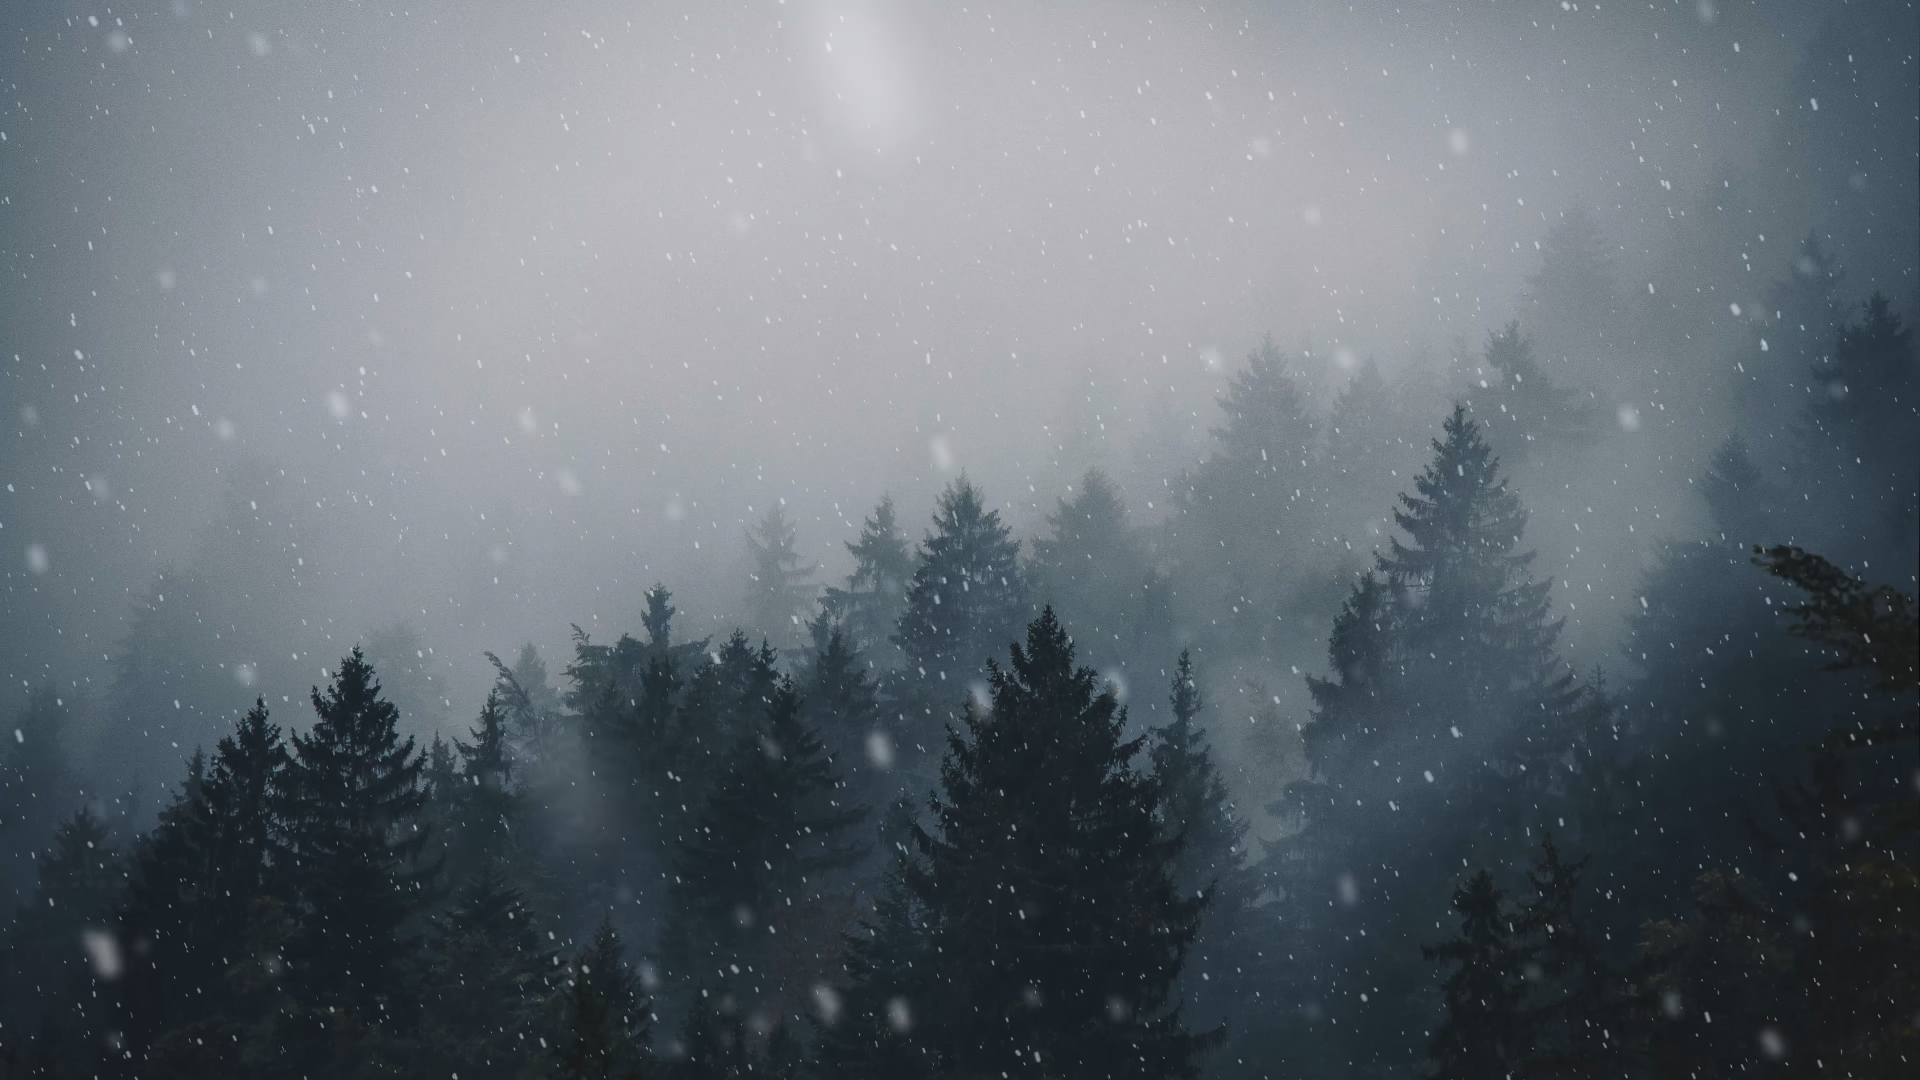 General 1920x1080 forest trees landscape mist snowing overcast winter pine trees